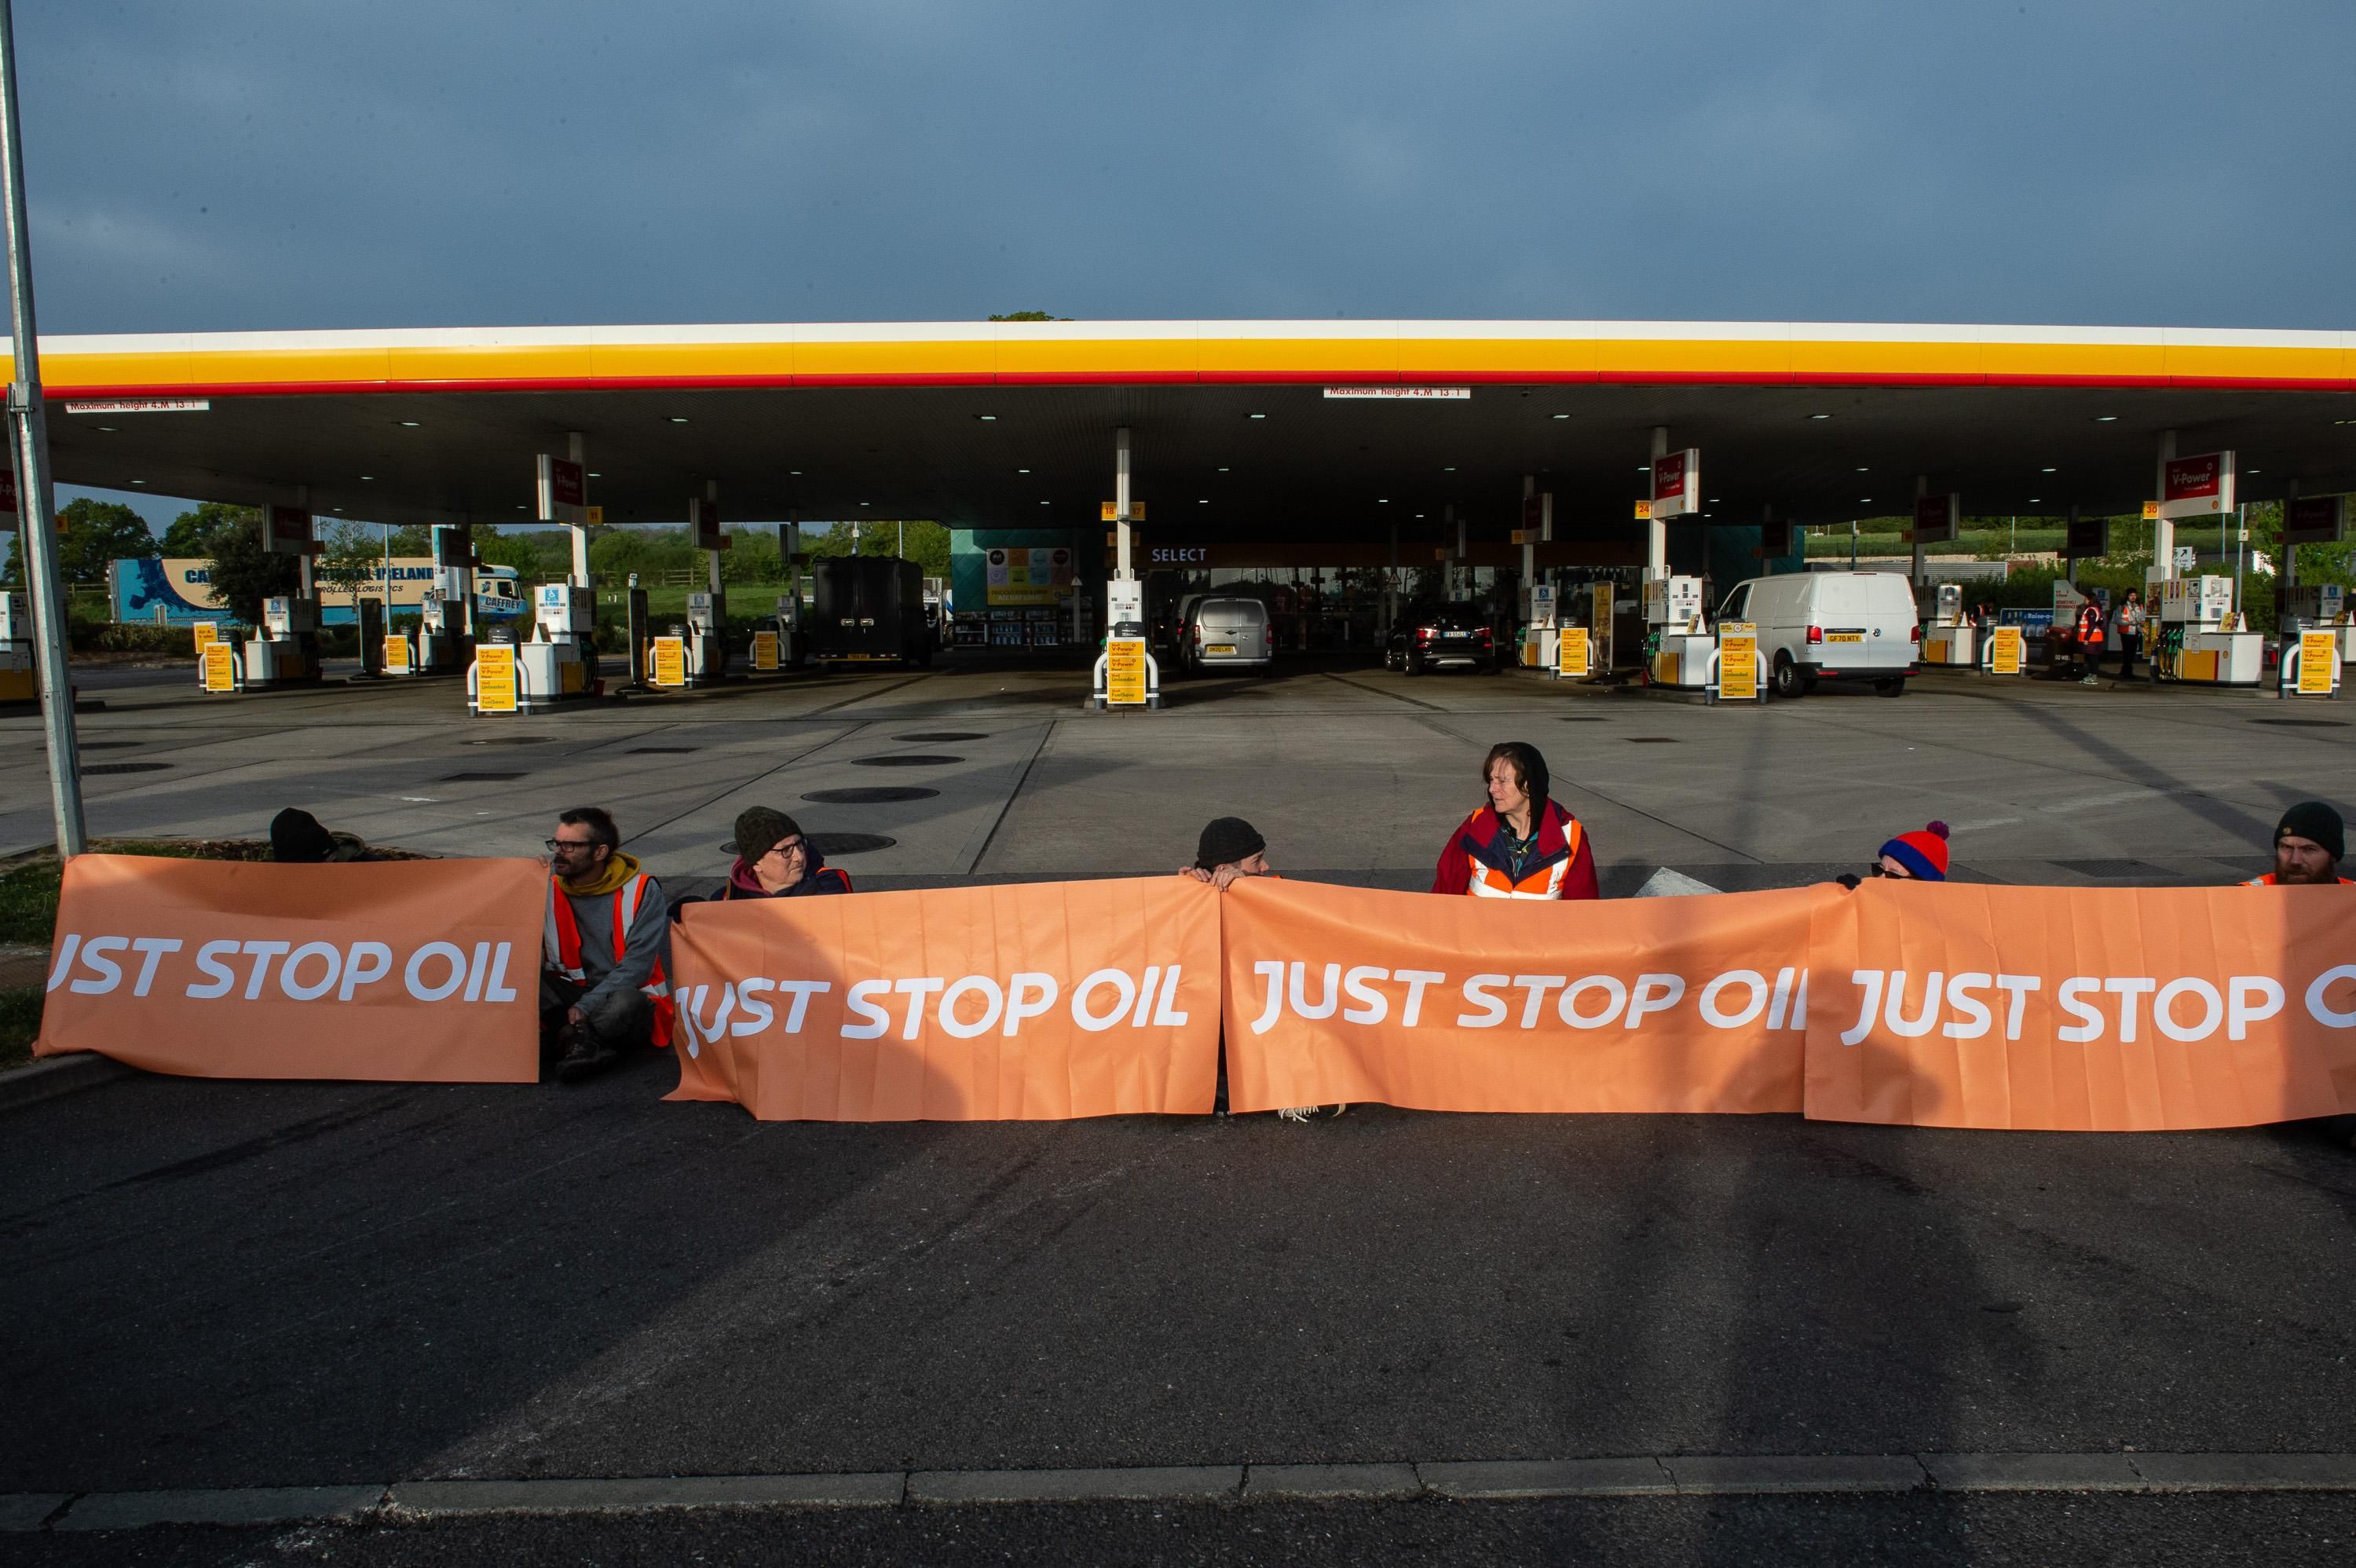 Activists from Just Stop Oil block the entrance to a Shell gas station on April 28, 2022 in Cobham, England.